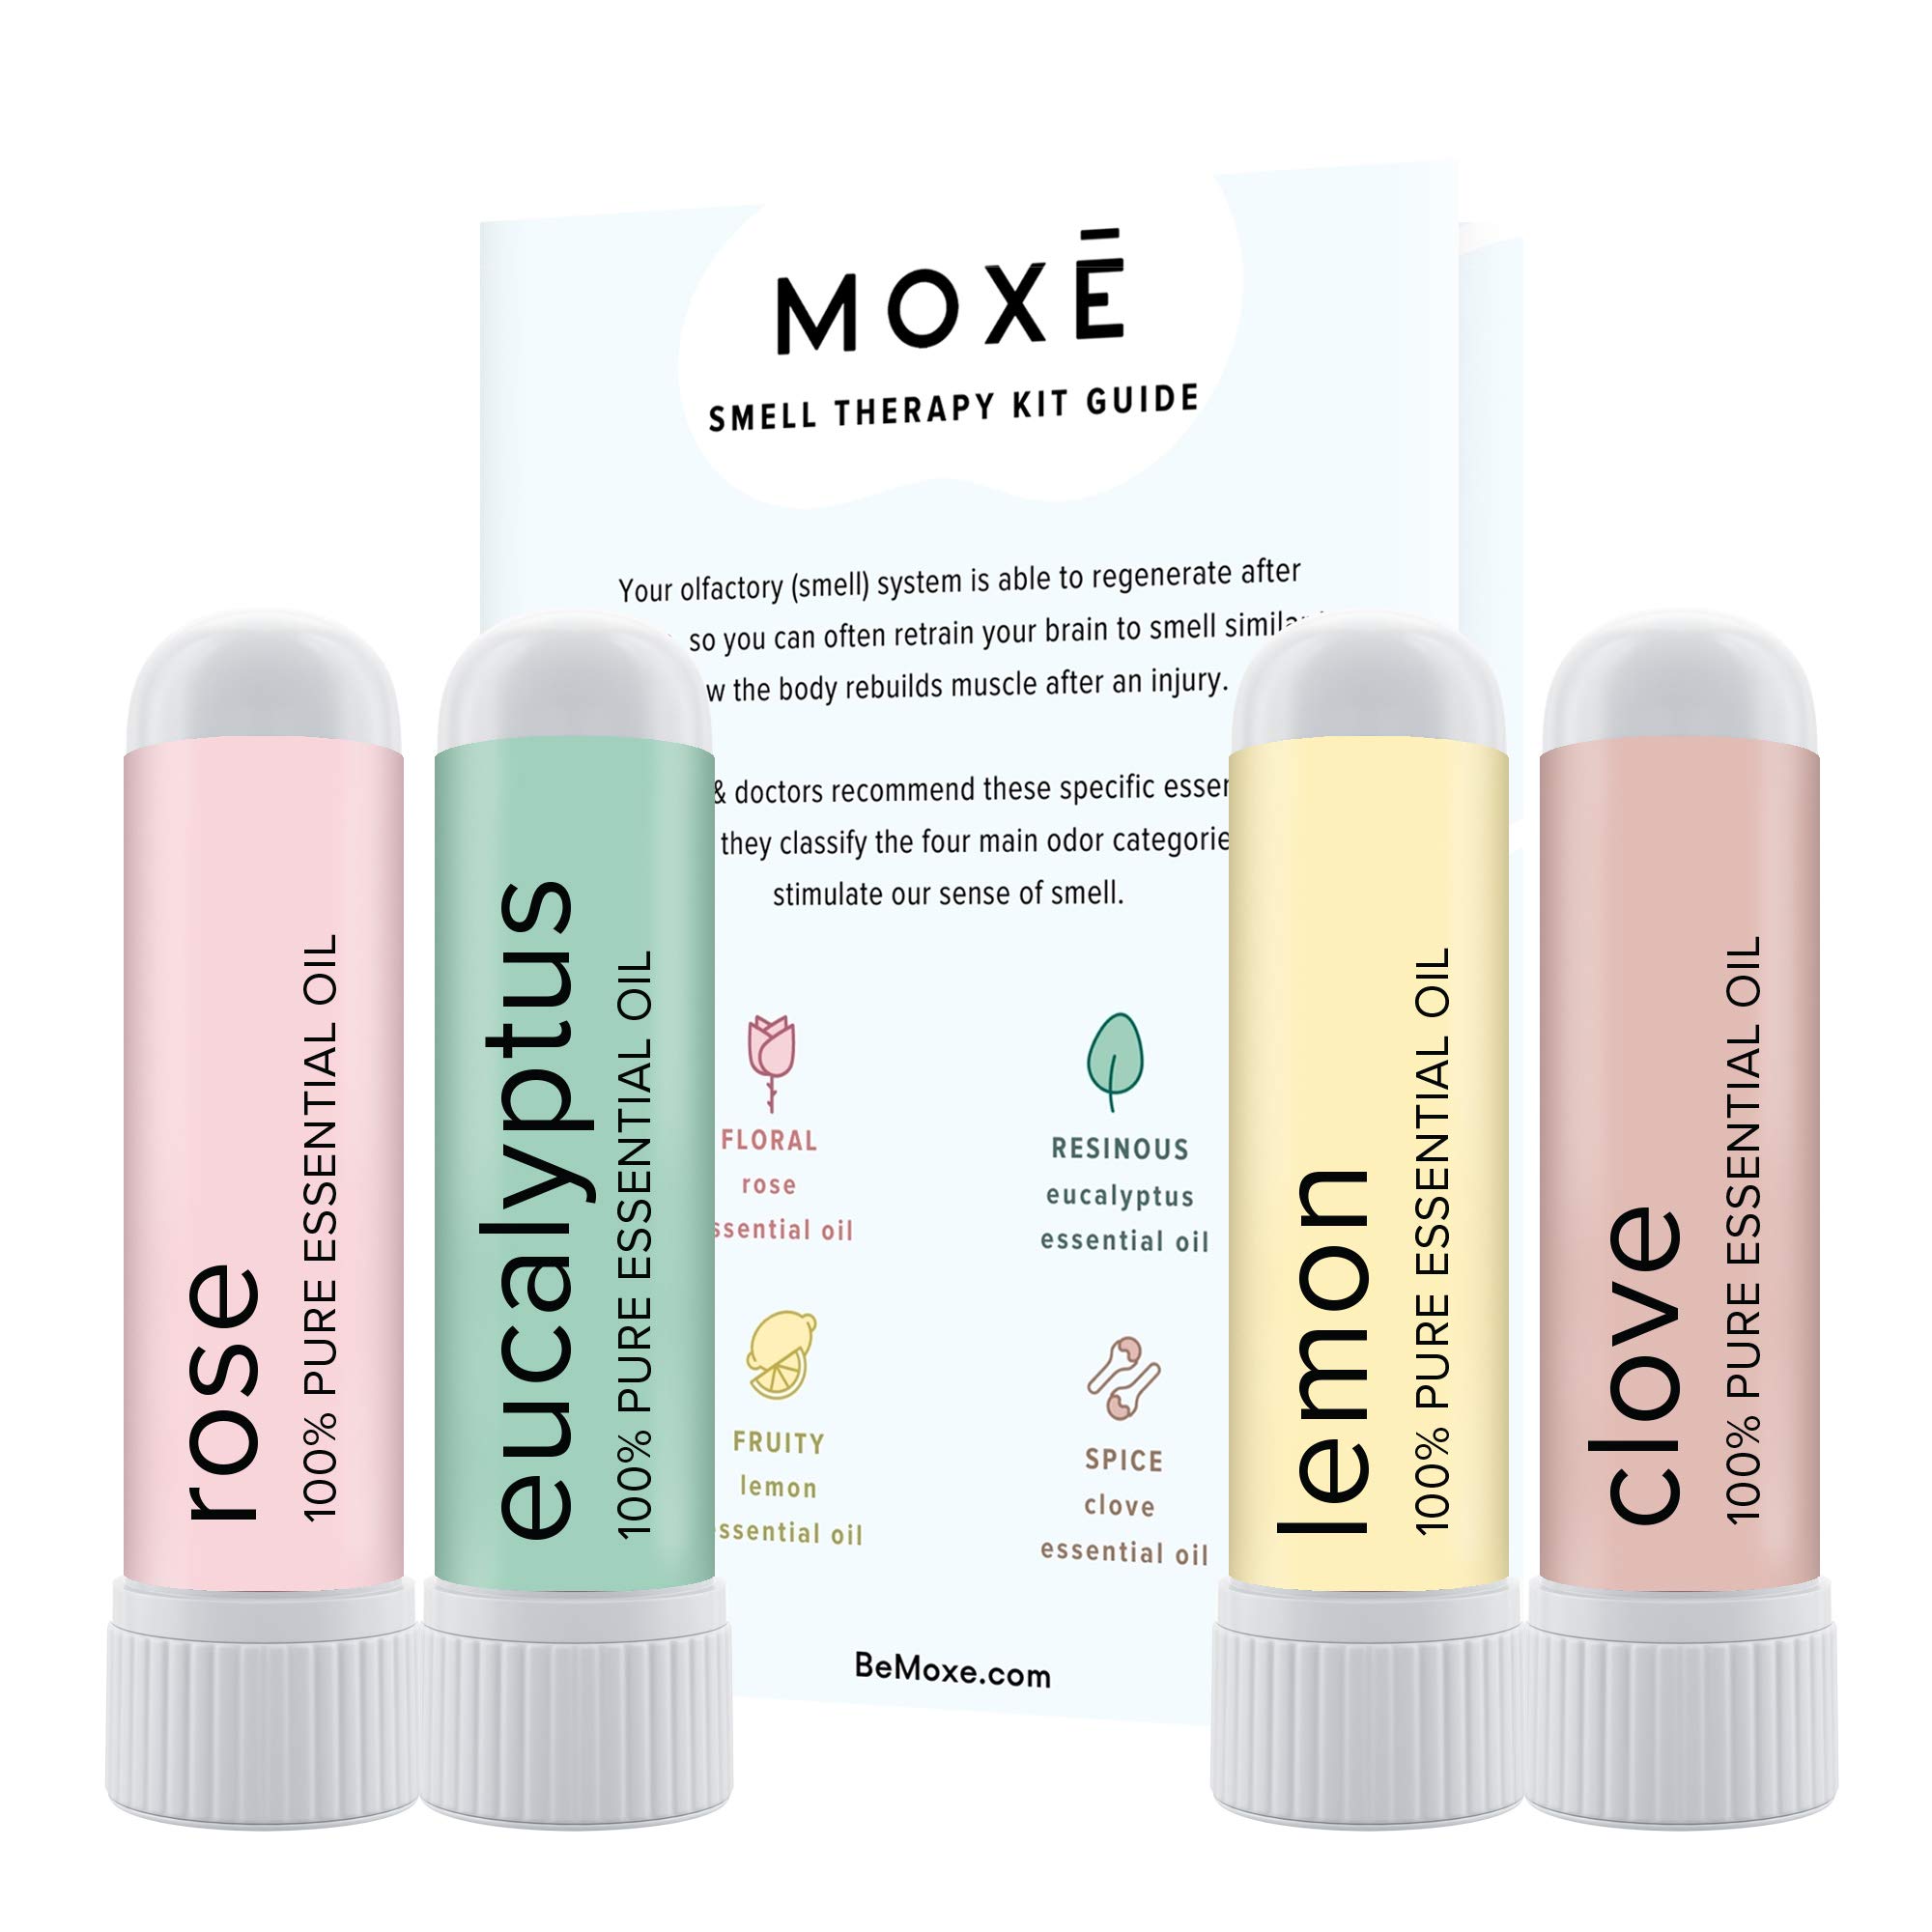 MOXĒ Smell Training Kit, Made in USA, 4 Essential Oils, Olfactory Regeneration, Helps Restore Sense of Smell, Natural Therapy for Smell Loss, Made in USA (Phase 1)